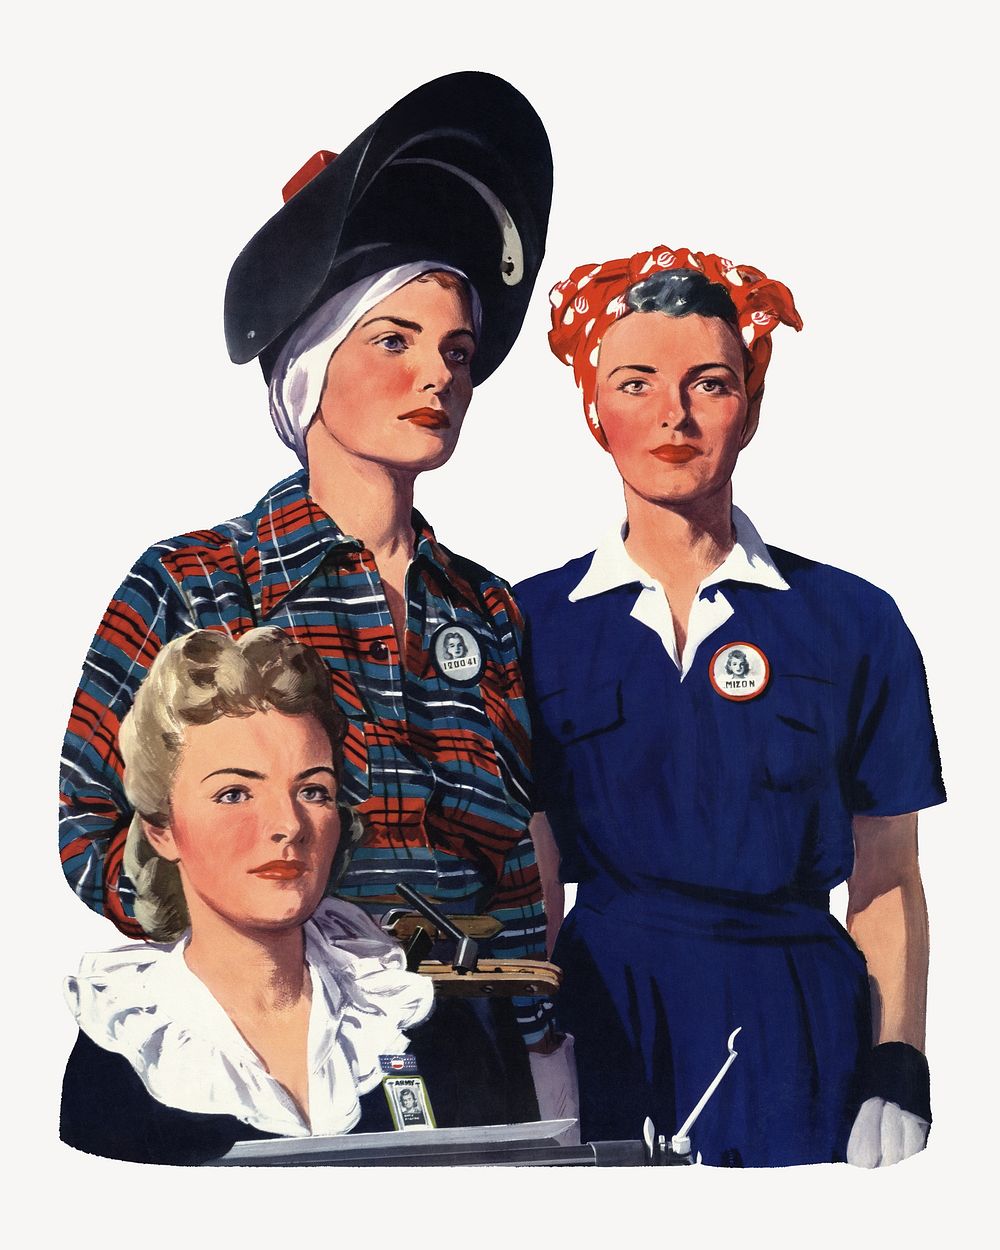 Feminist movement illustration. Original public domain image from the Library of Congress. Digitally enhanced by rawpixel.